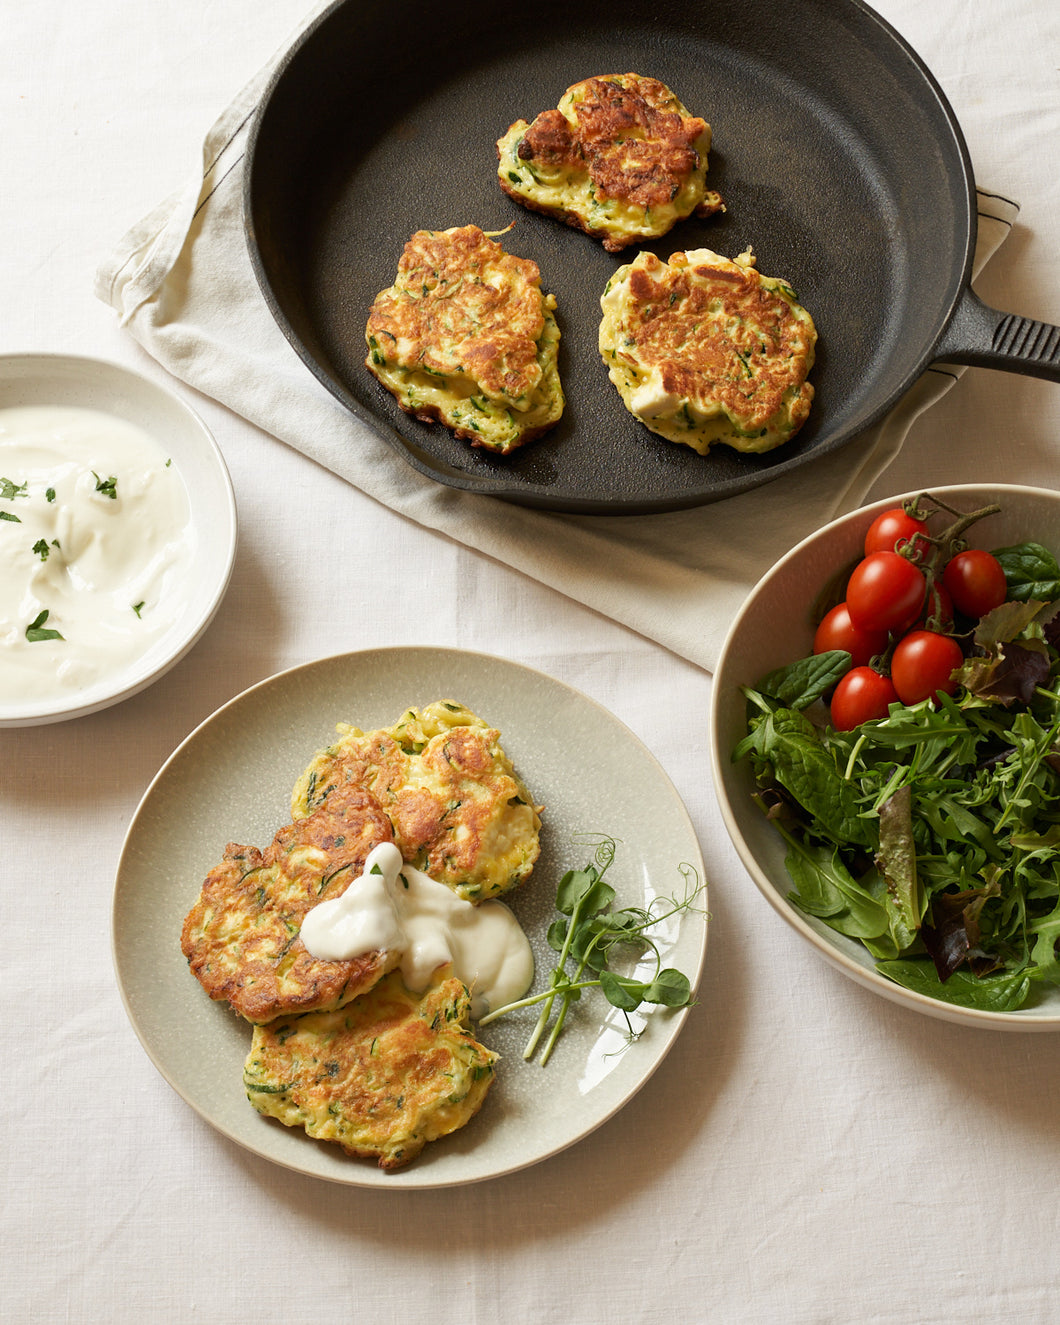 Courgette Fritters Meal Kit (vegetarian)